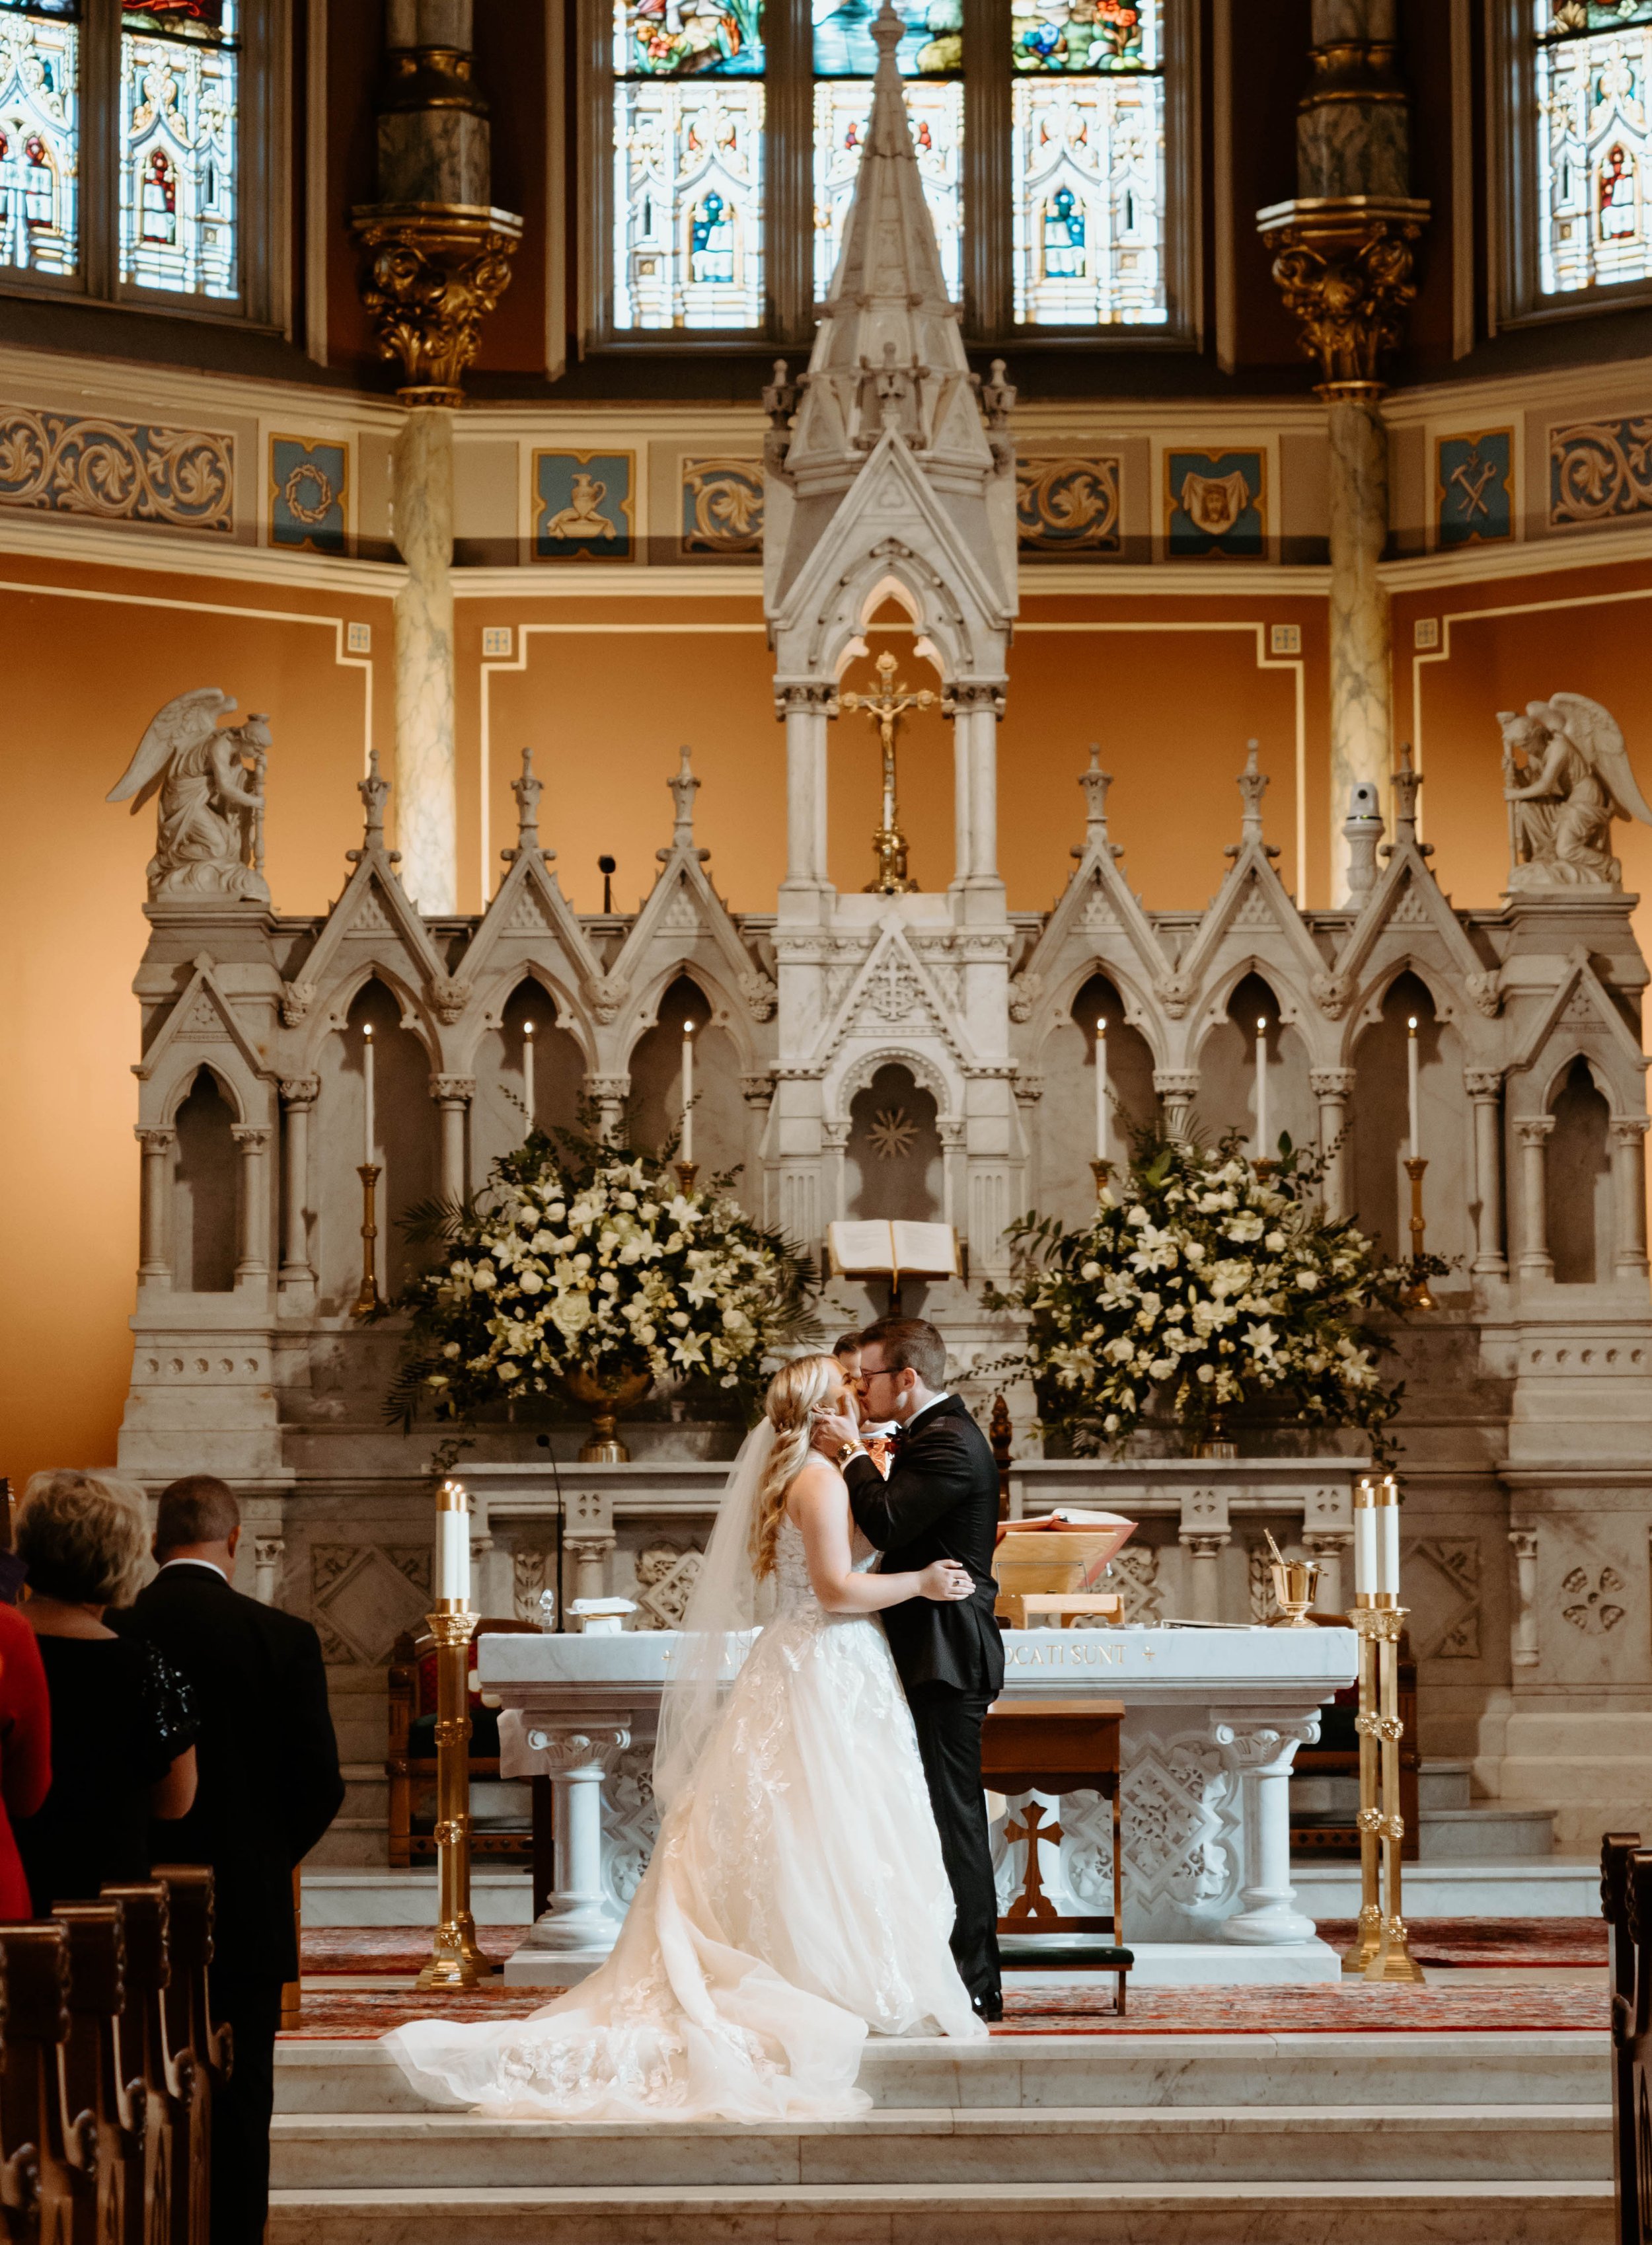 Ivory-and-beau-bride-ansley-bought-sparkly-and-traditional-highneck-ballgown-at-savannah-bridal-shop-gets-married-at-cathedral-with-the-help-of-ivory-and-beau-who-created-floral-peices-for-the-ceremony-and-reception-in-their-savannah-florwer-shop-40.jpg